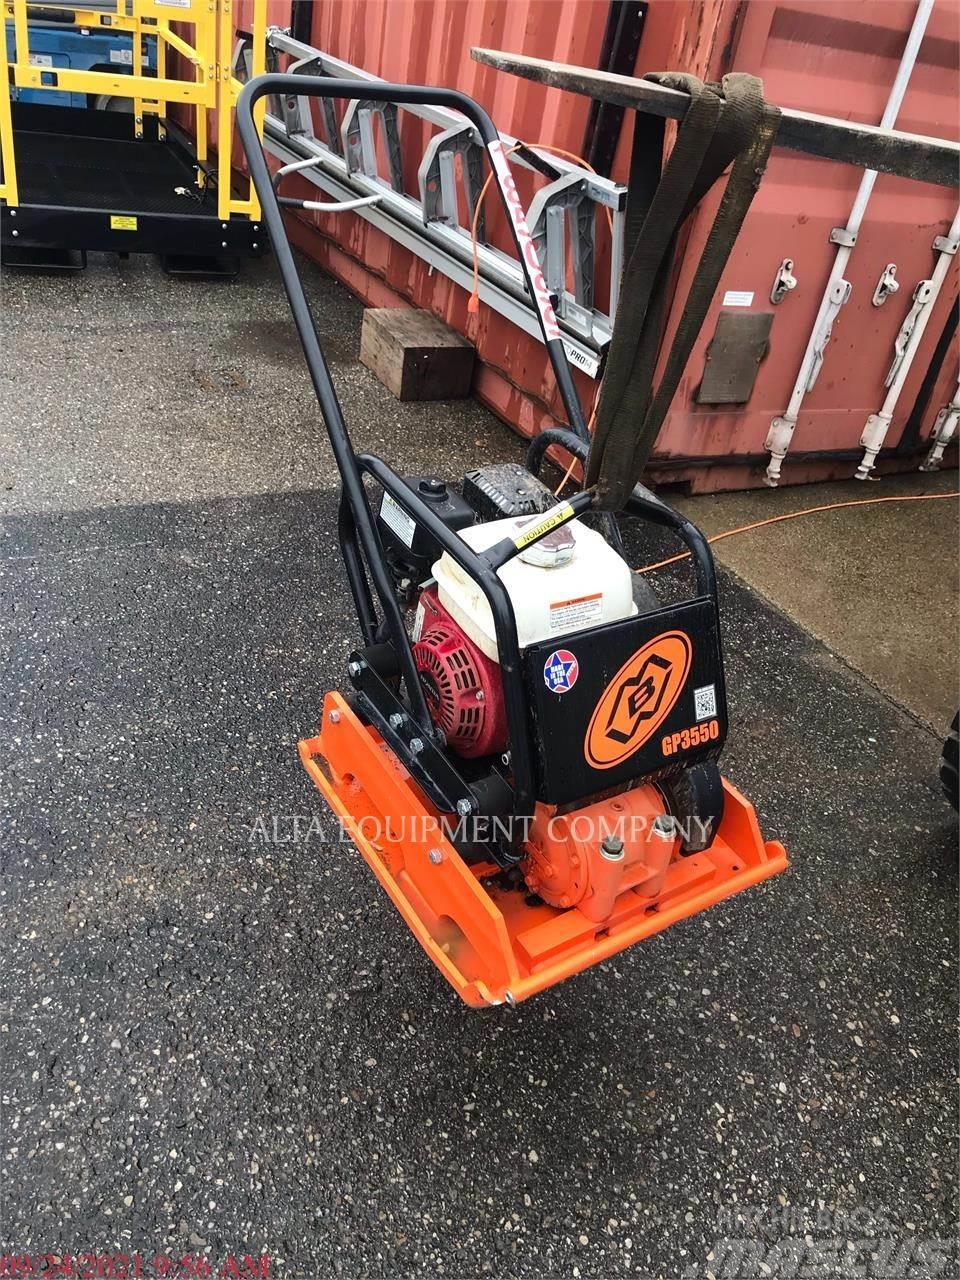 MBW GP3550 Towed vibratory rollers